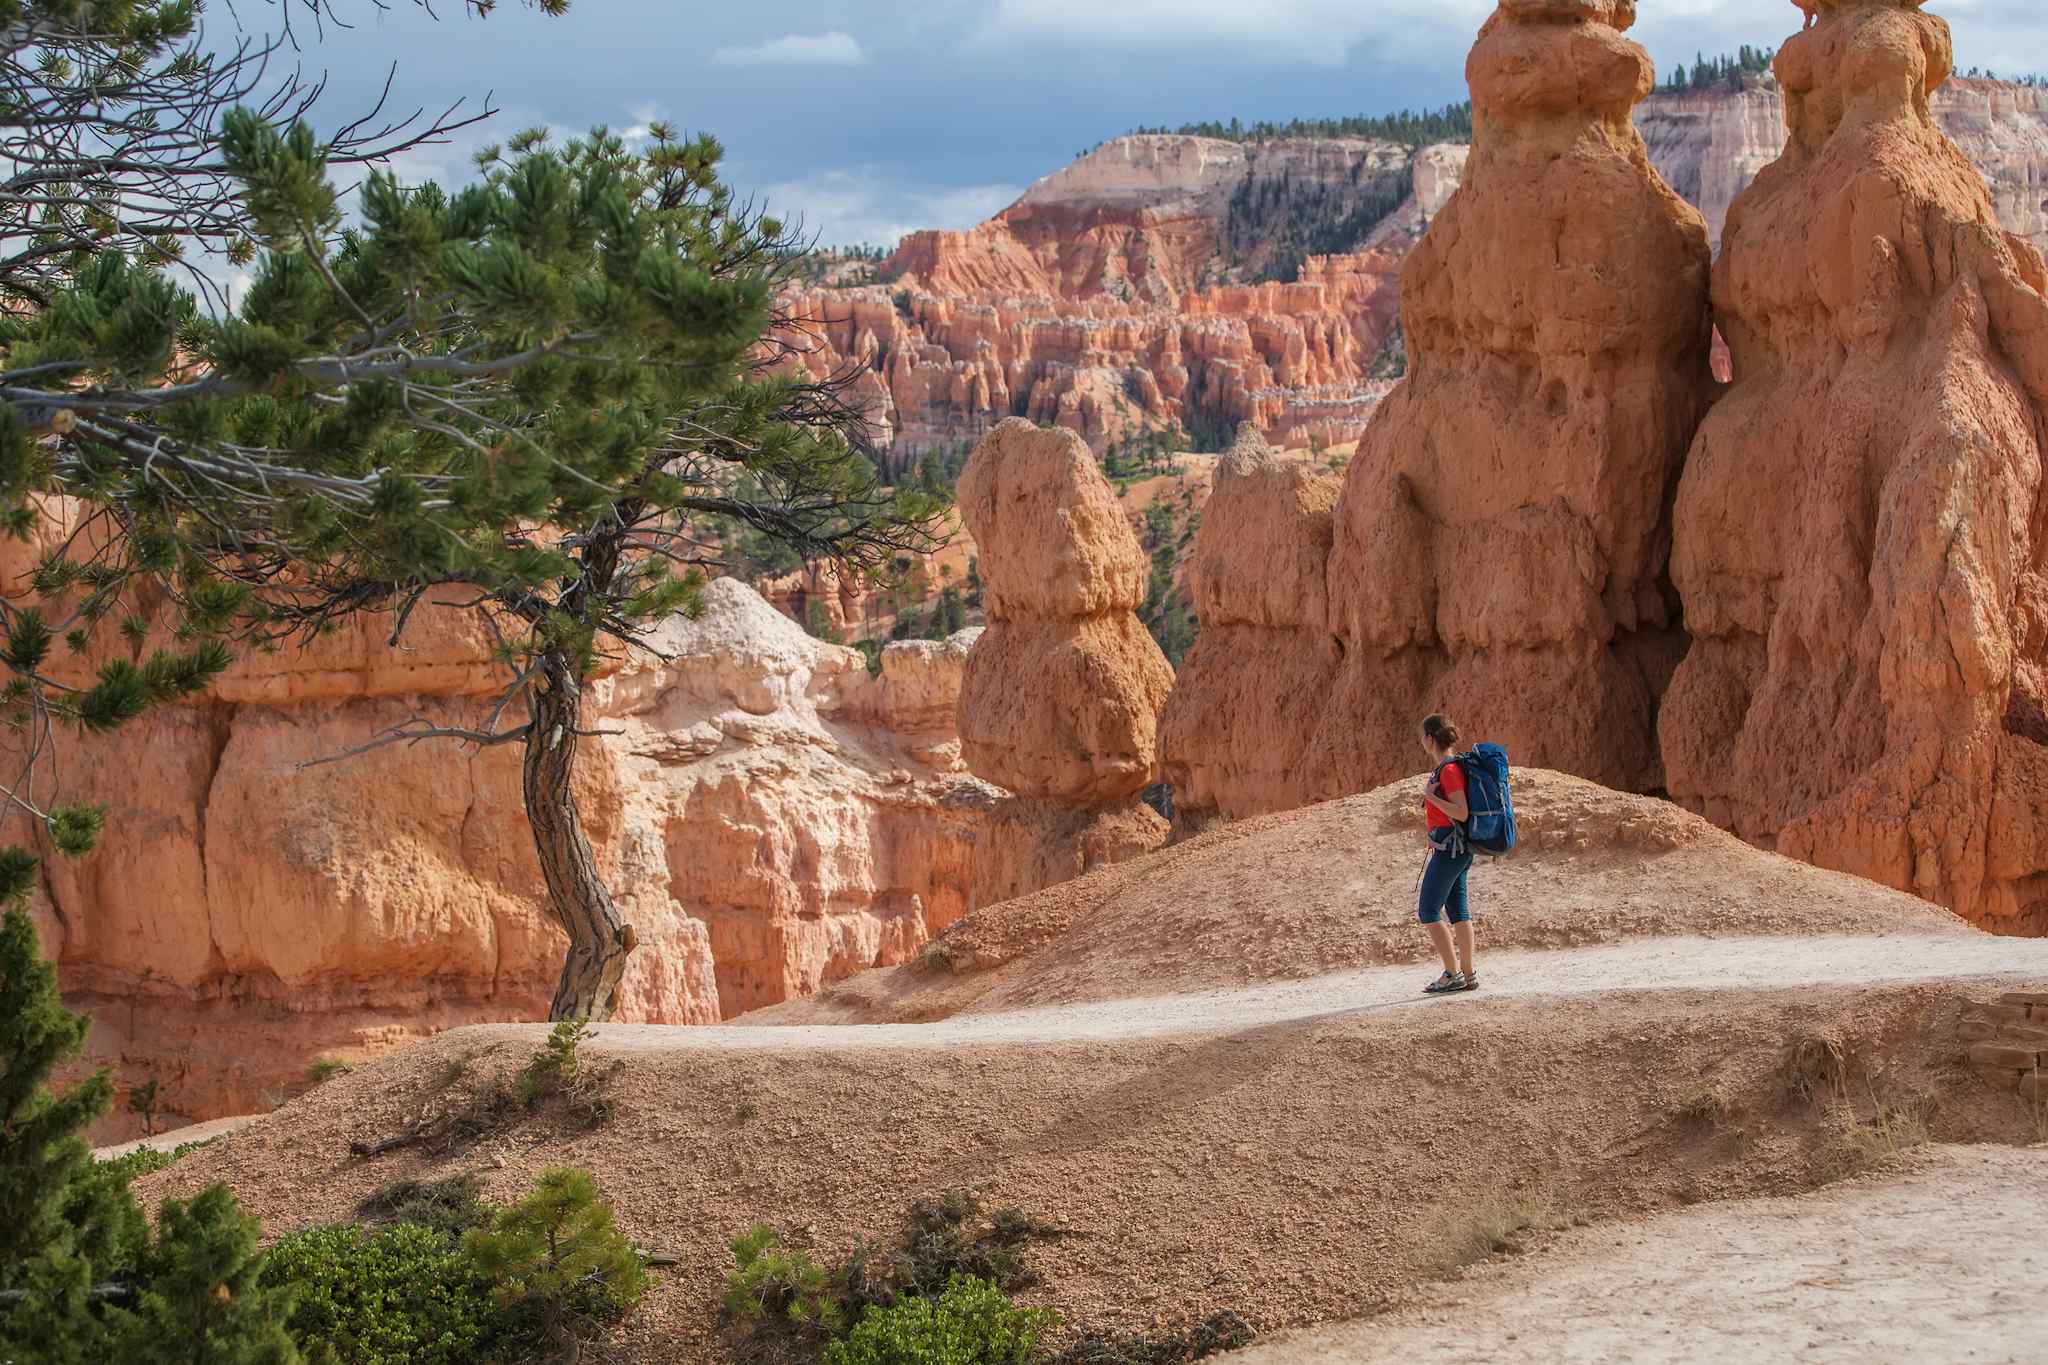 Hiker in Bryce canyon National park in Utah, USA
Getty: 960260968
